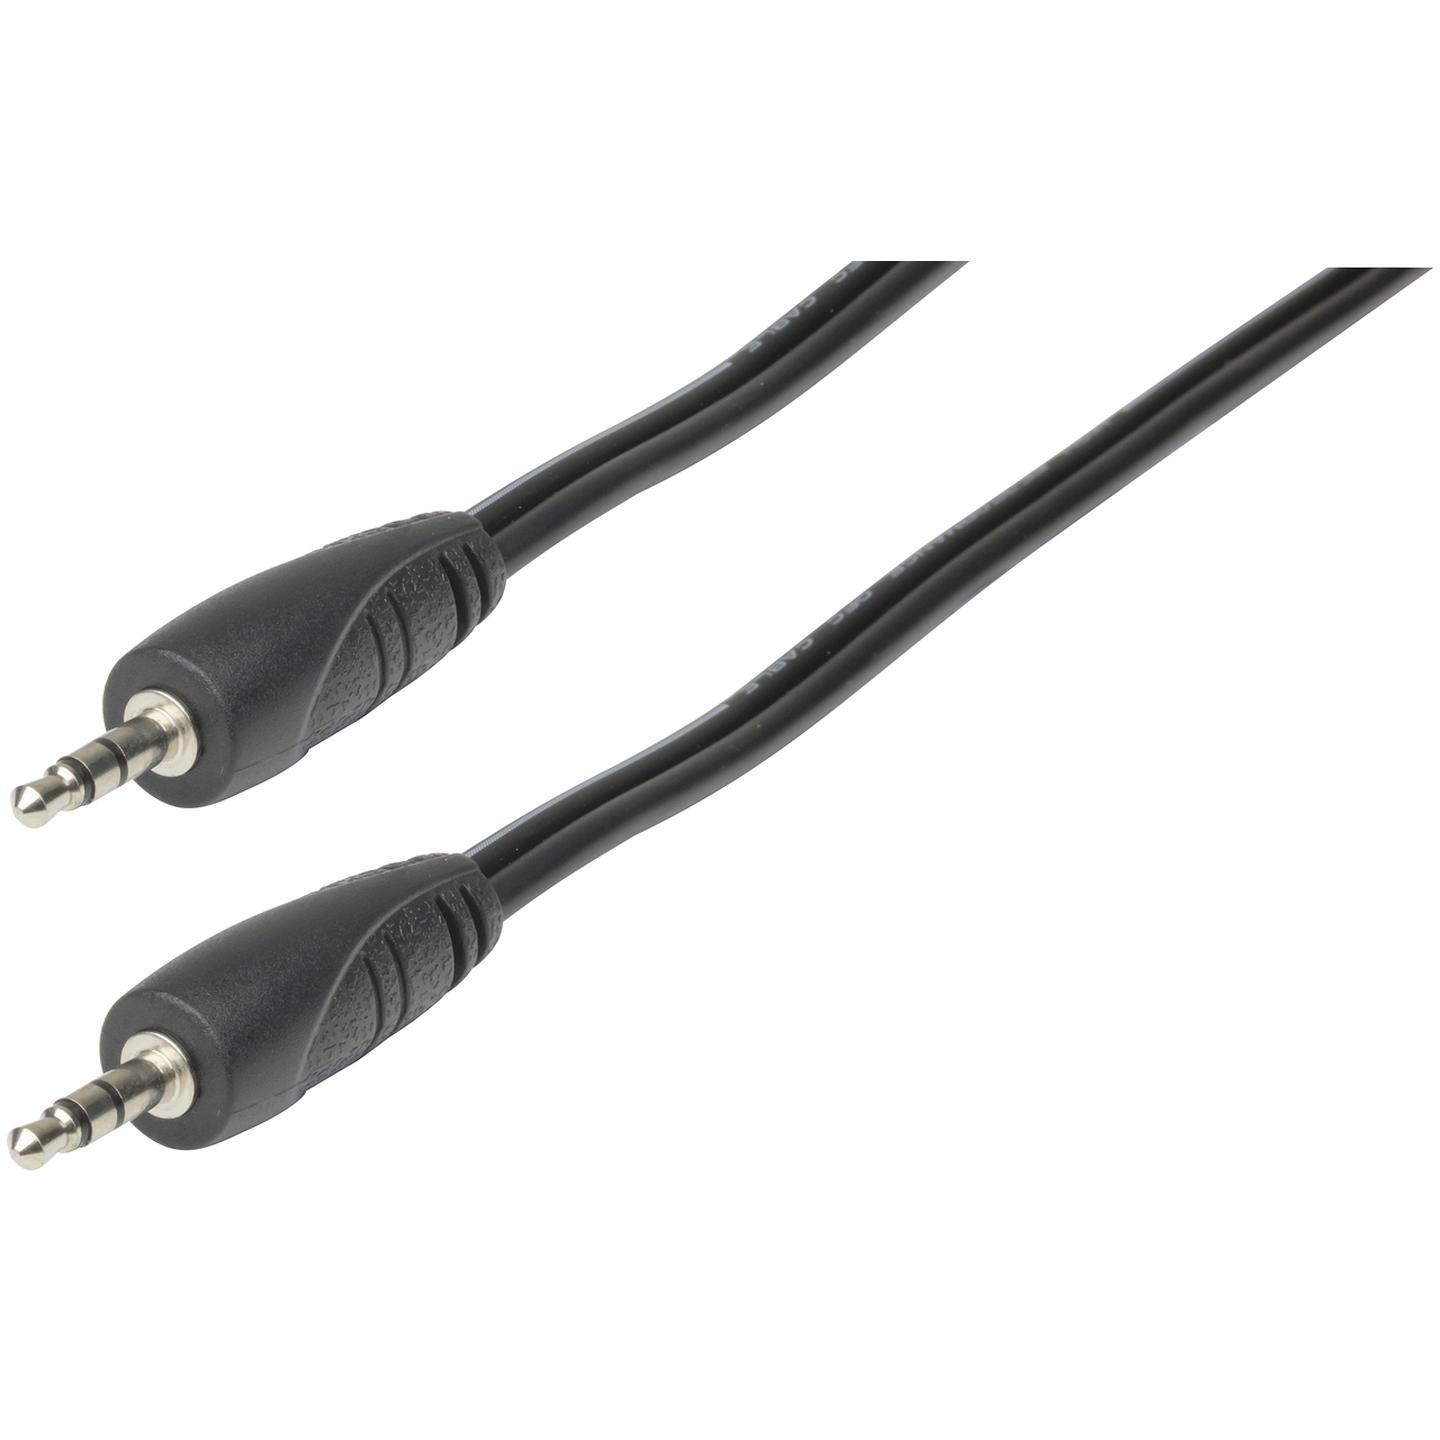 3.5mm Stereo Plug to 3.5mm Stereo Plug Audio Cable - 1.5m